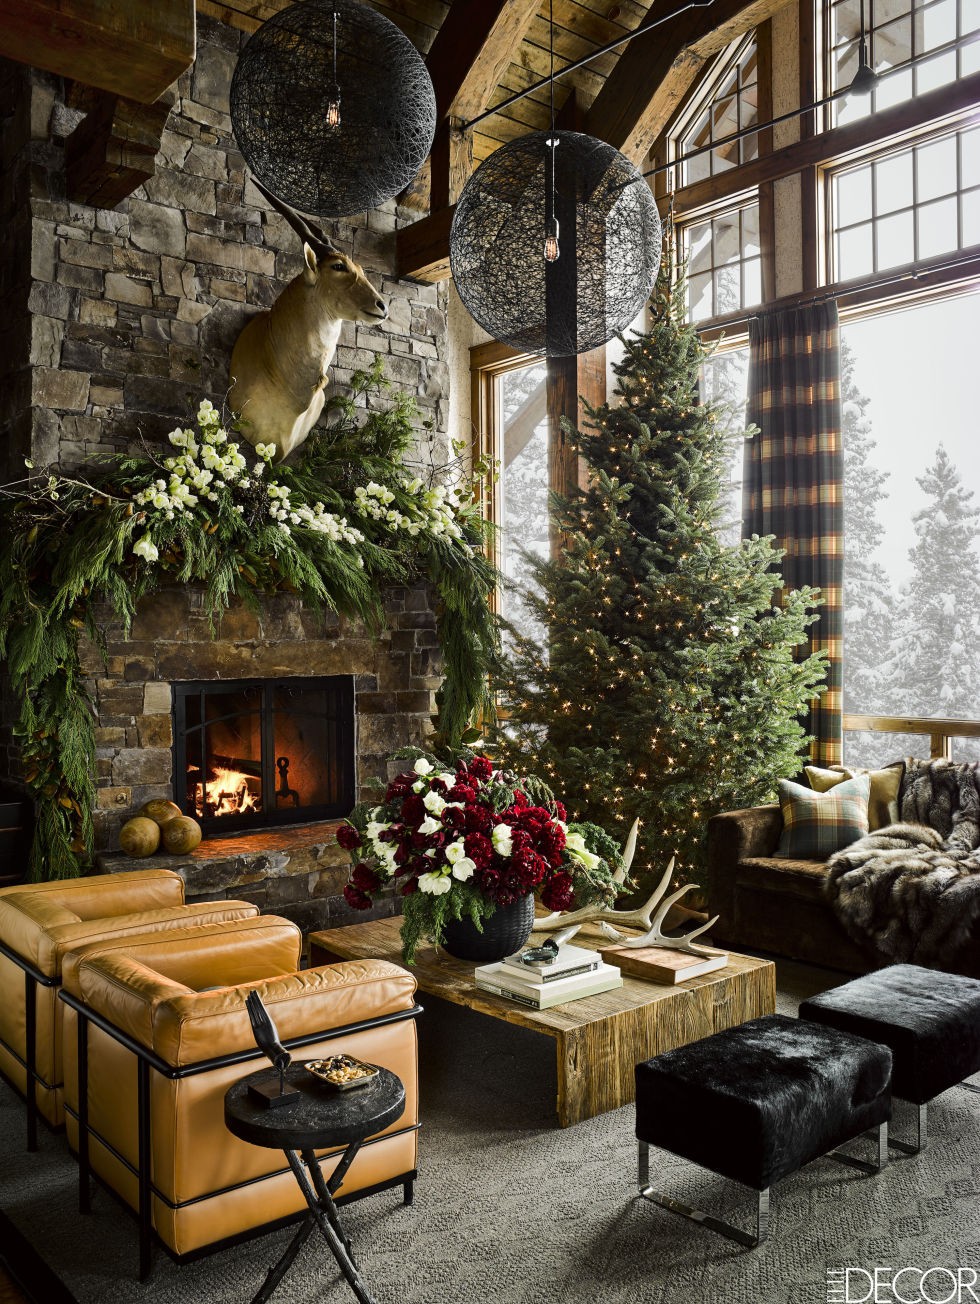 Montana Guest House All Decked Up in Christmas | Christmas decoration is already in the shop windows and everyone is getting into the Christmas spirit. #interiordesign #christmasdecor #homedecor #decoration #seasondecor #winterinspirations